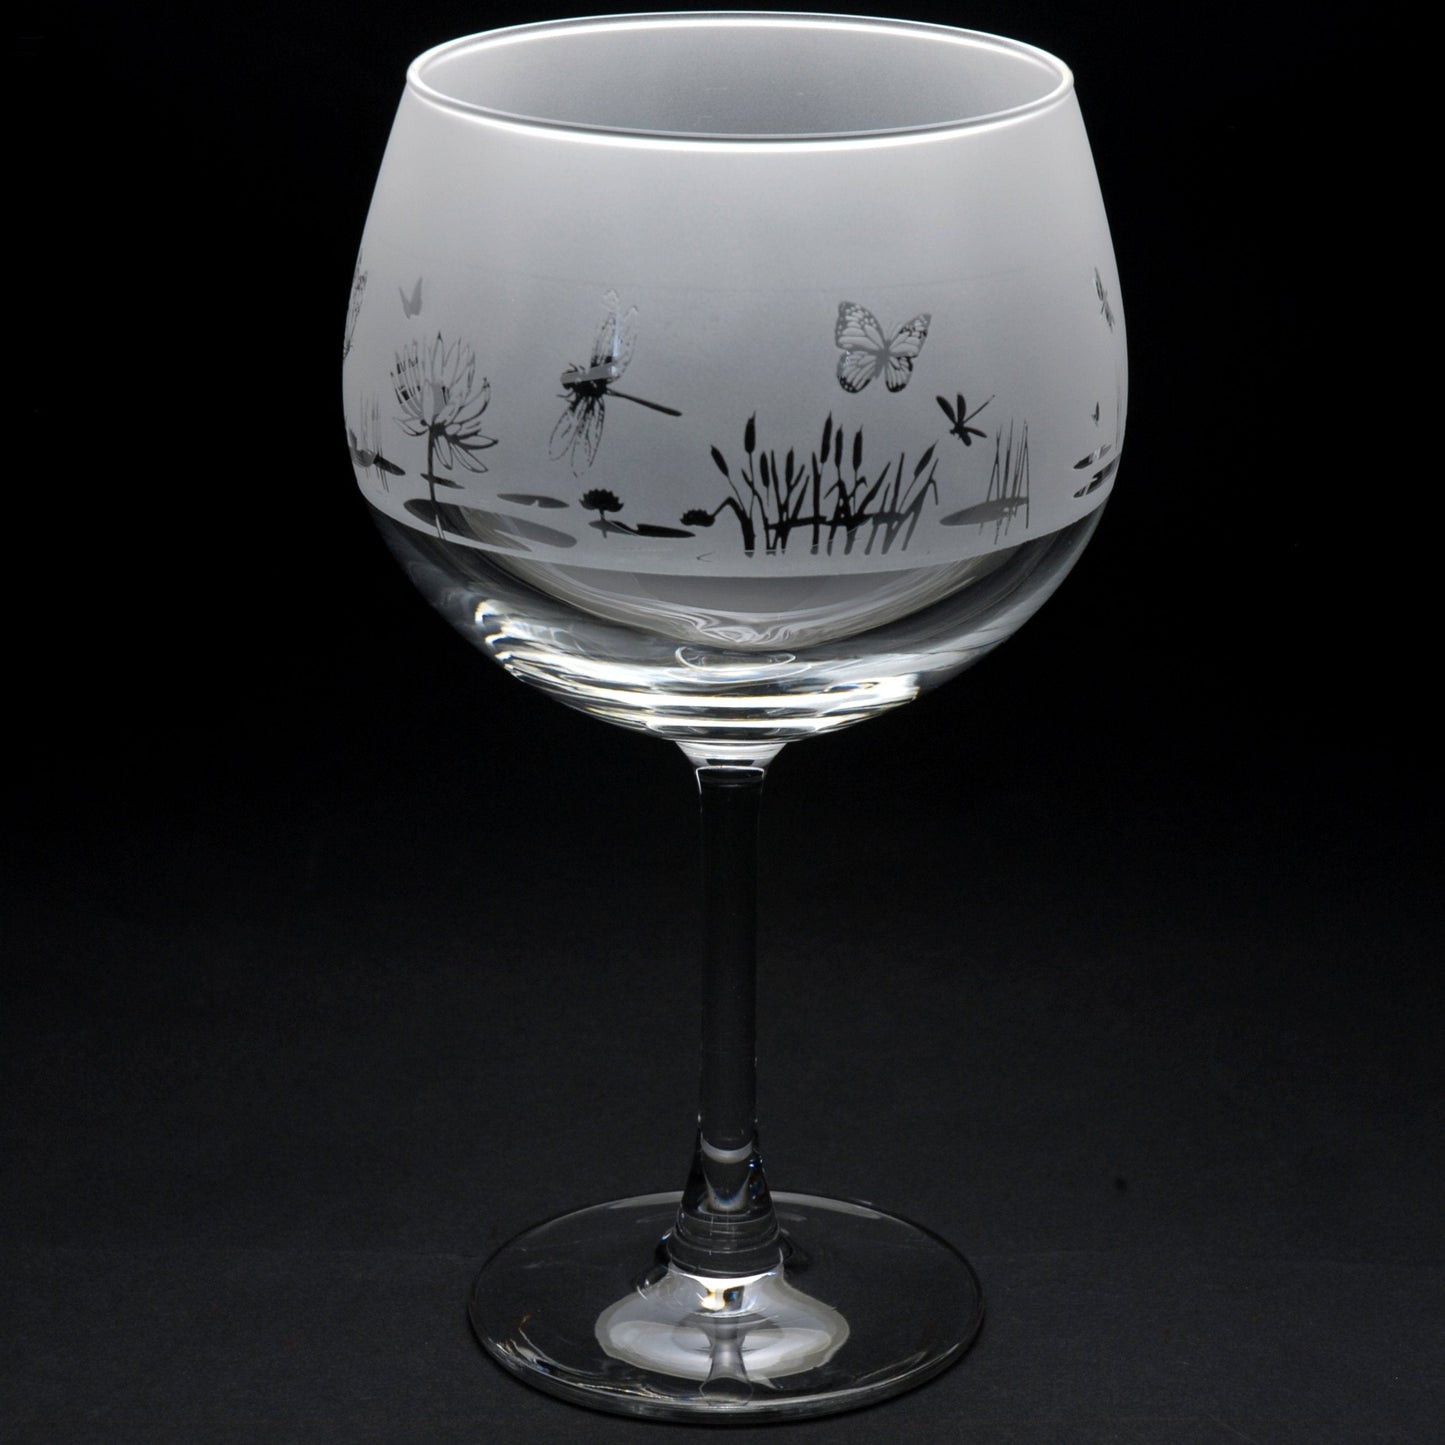 Butterfly and Dragonfly Gin Cocktail Glass - Hand Etched/Engraved Gift